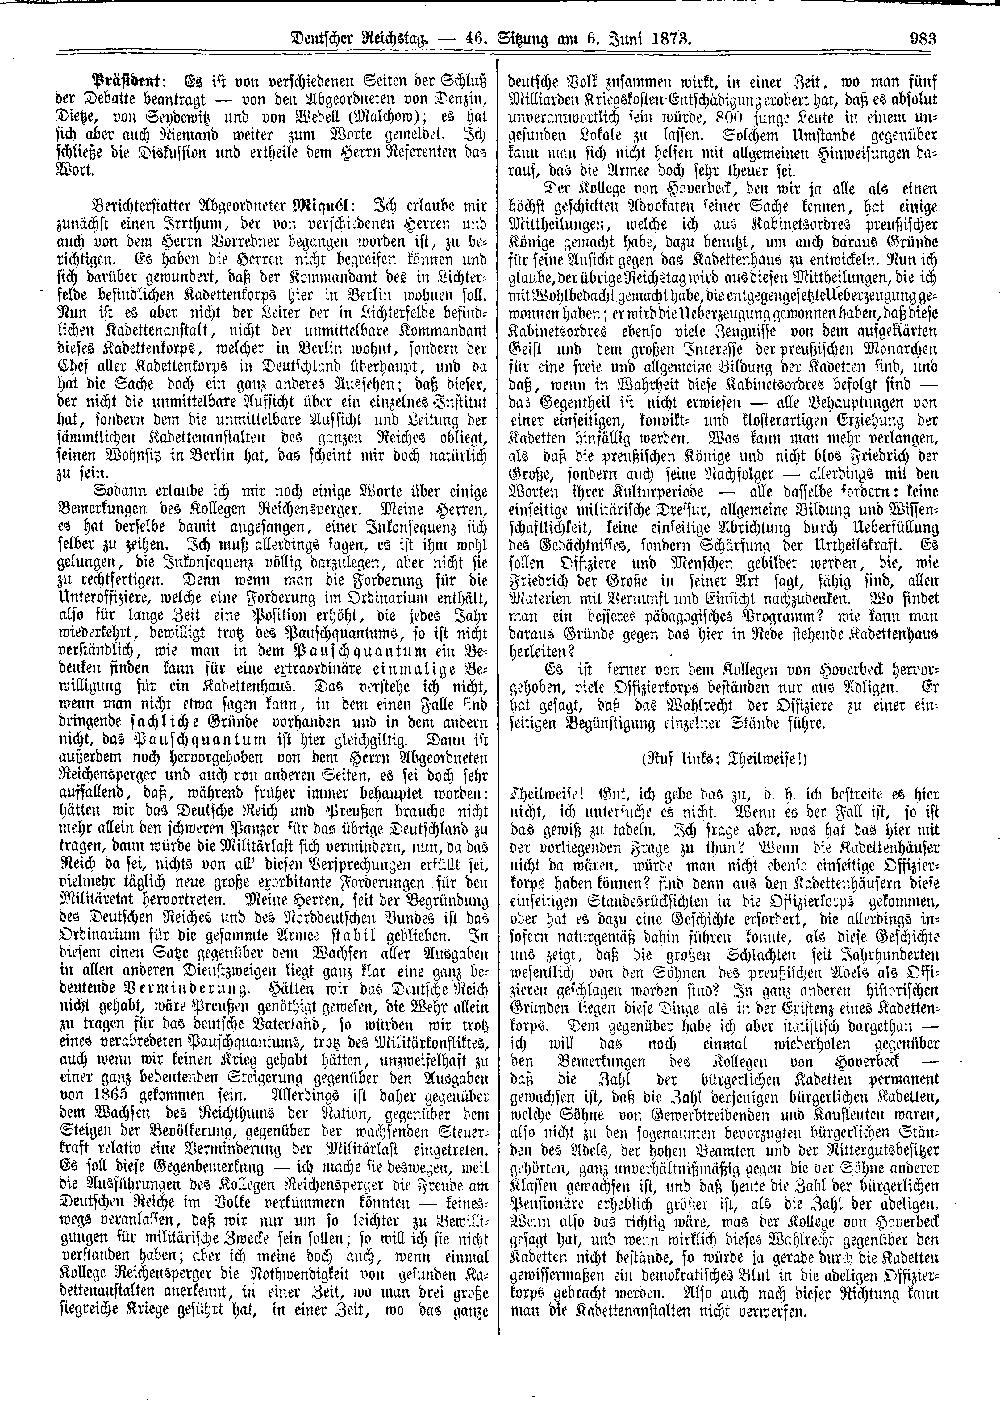 Scan of page 983